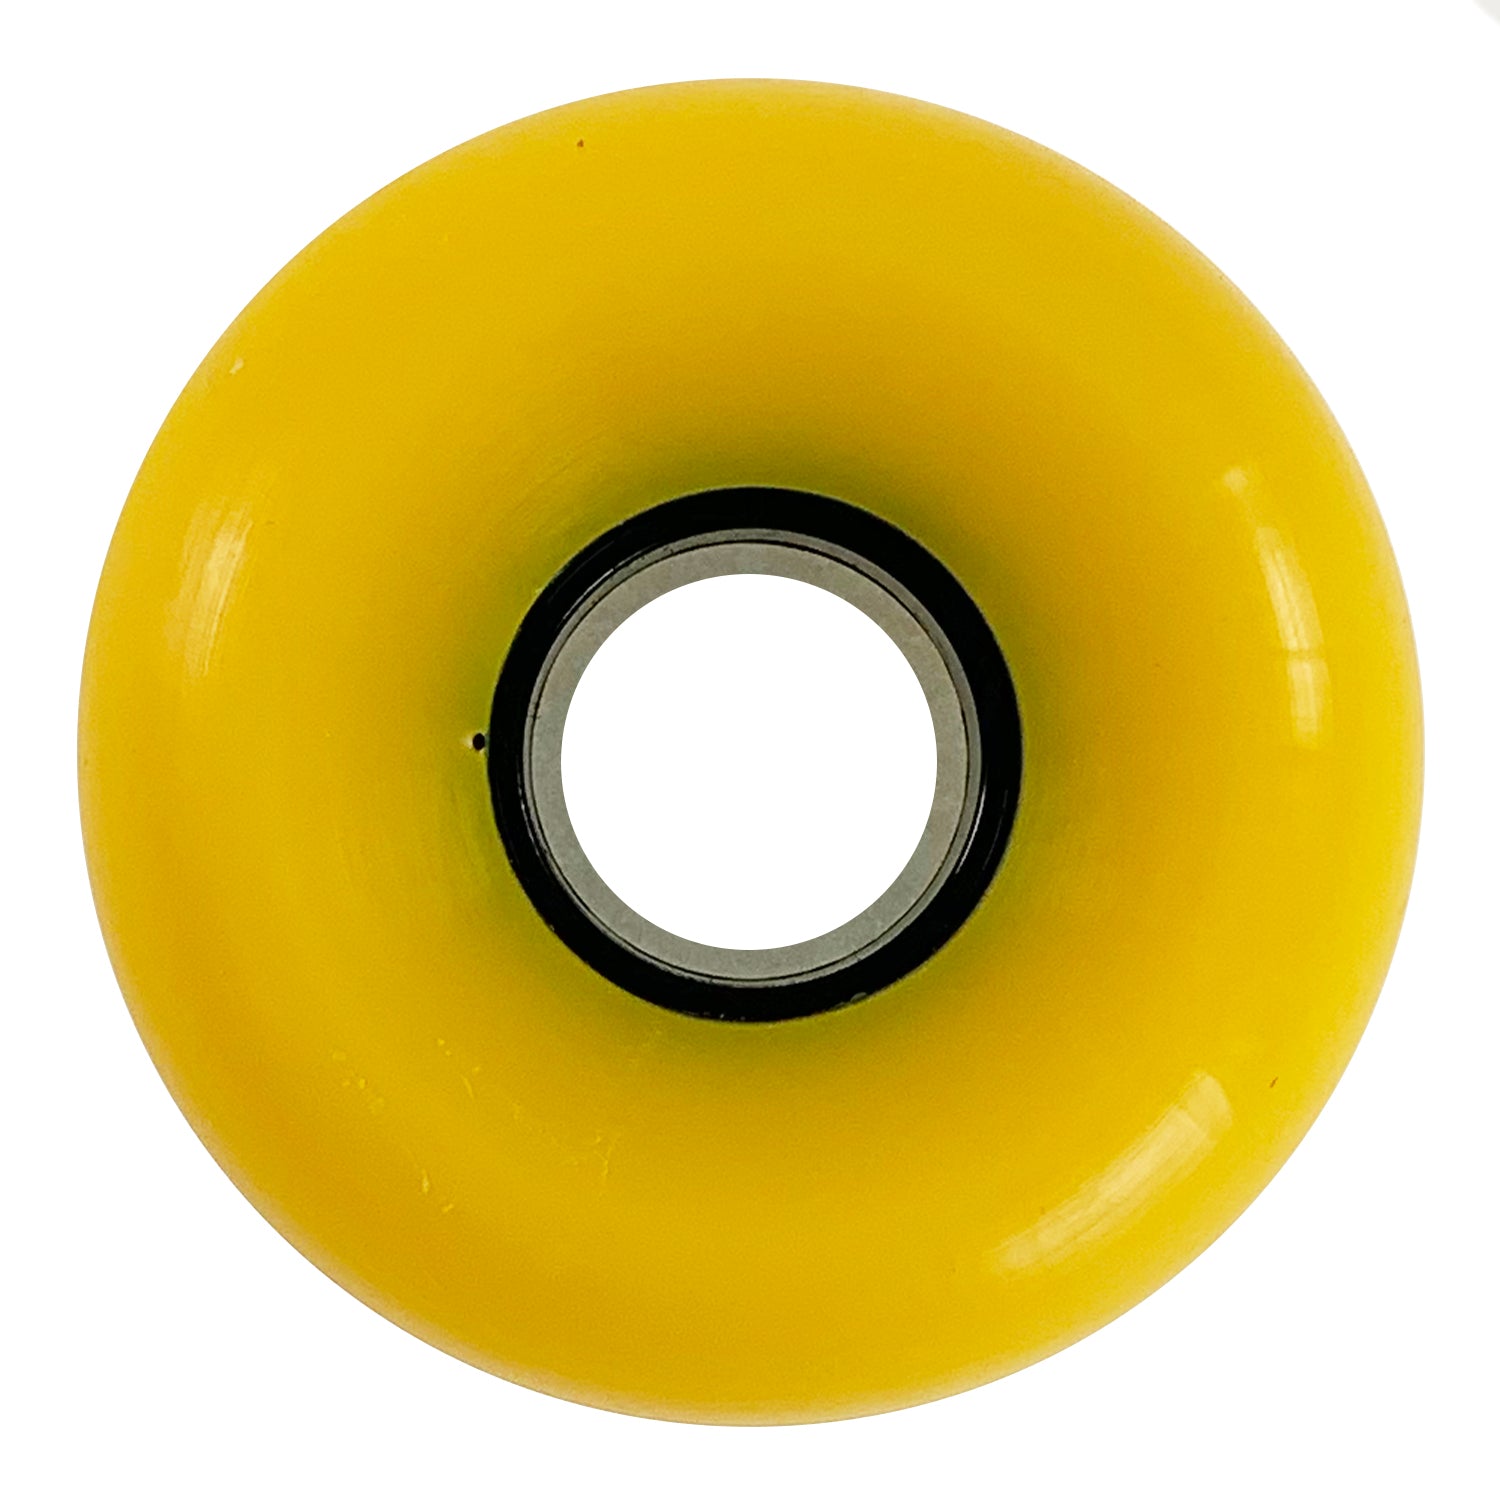 Orbs - 56mm - 85a - Pugs Soft Wheels - Yellow - Prime Delux Store